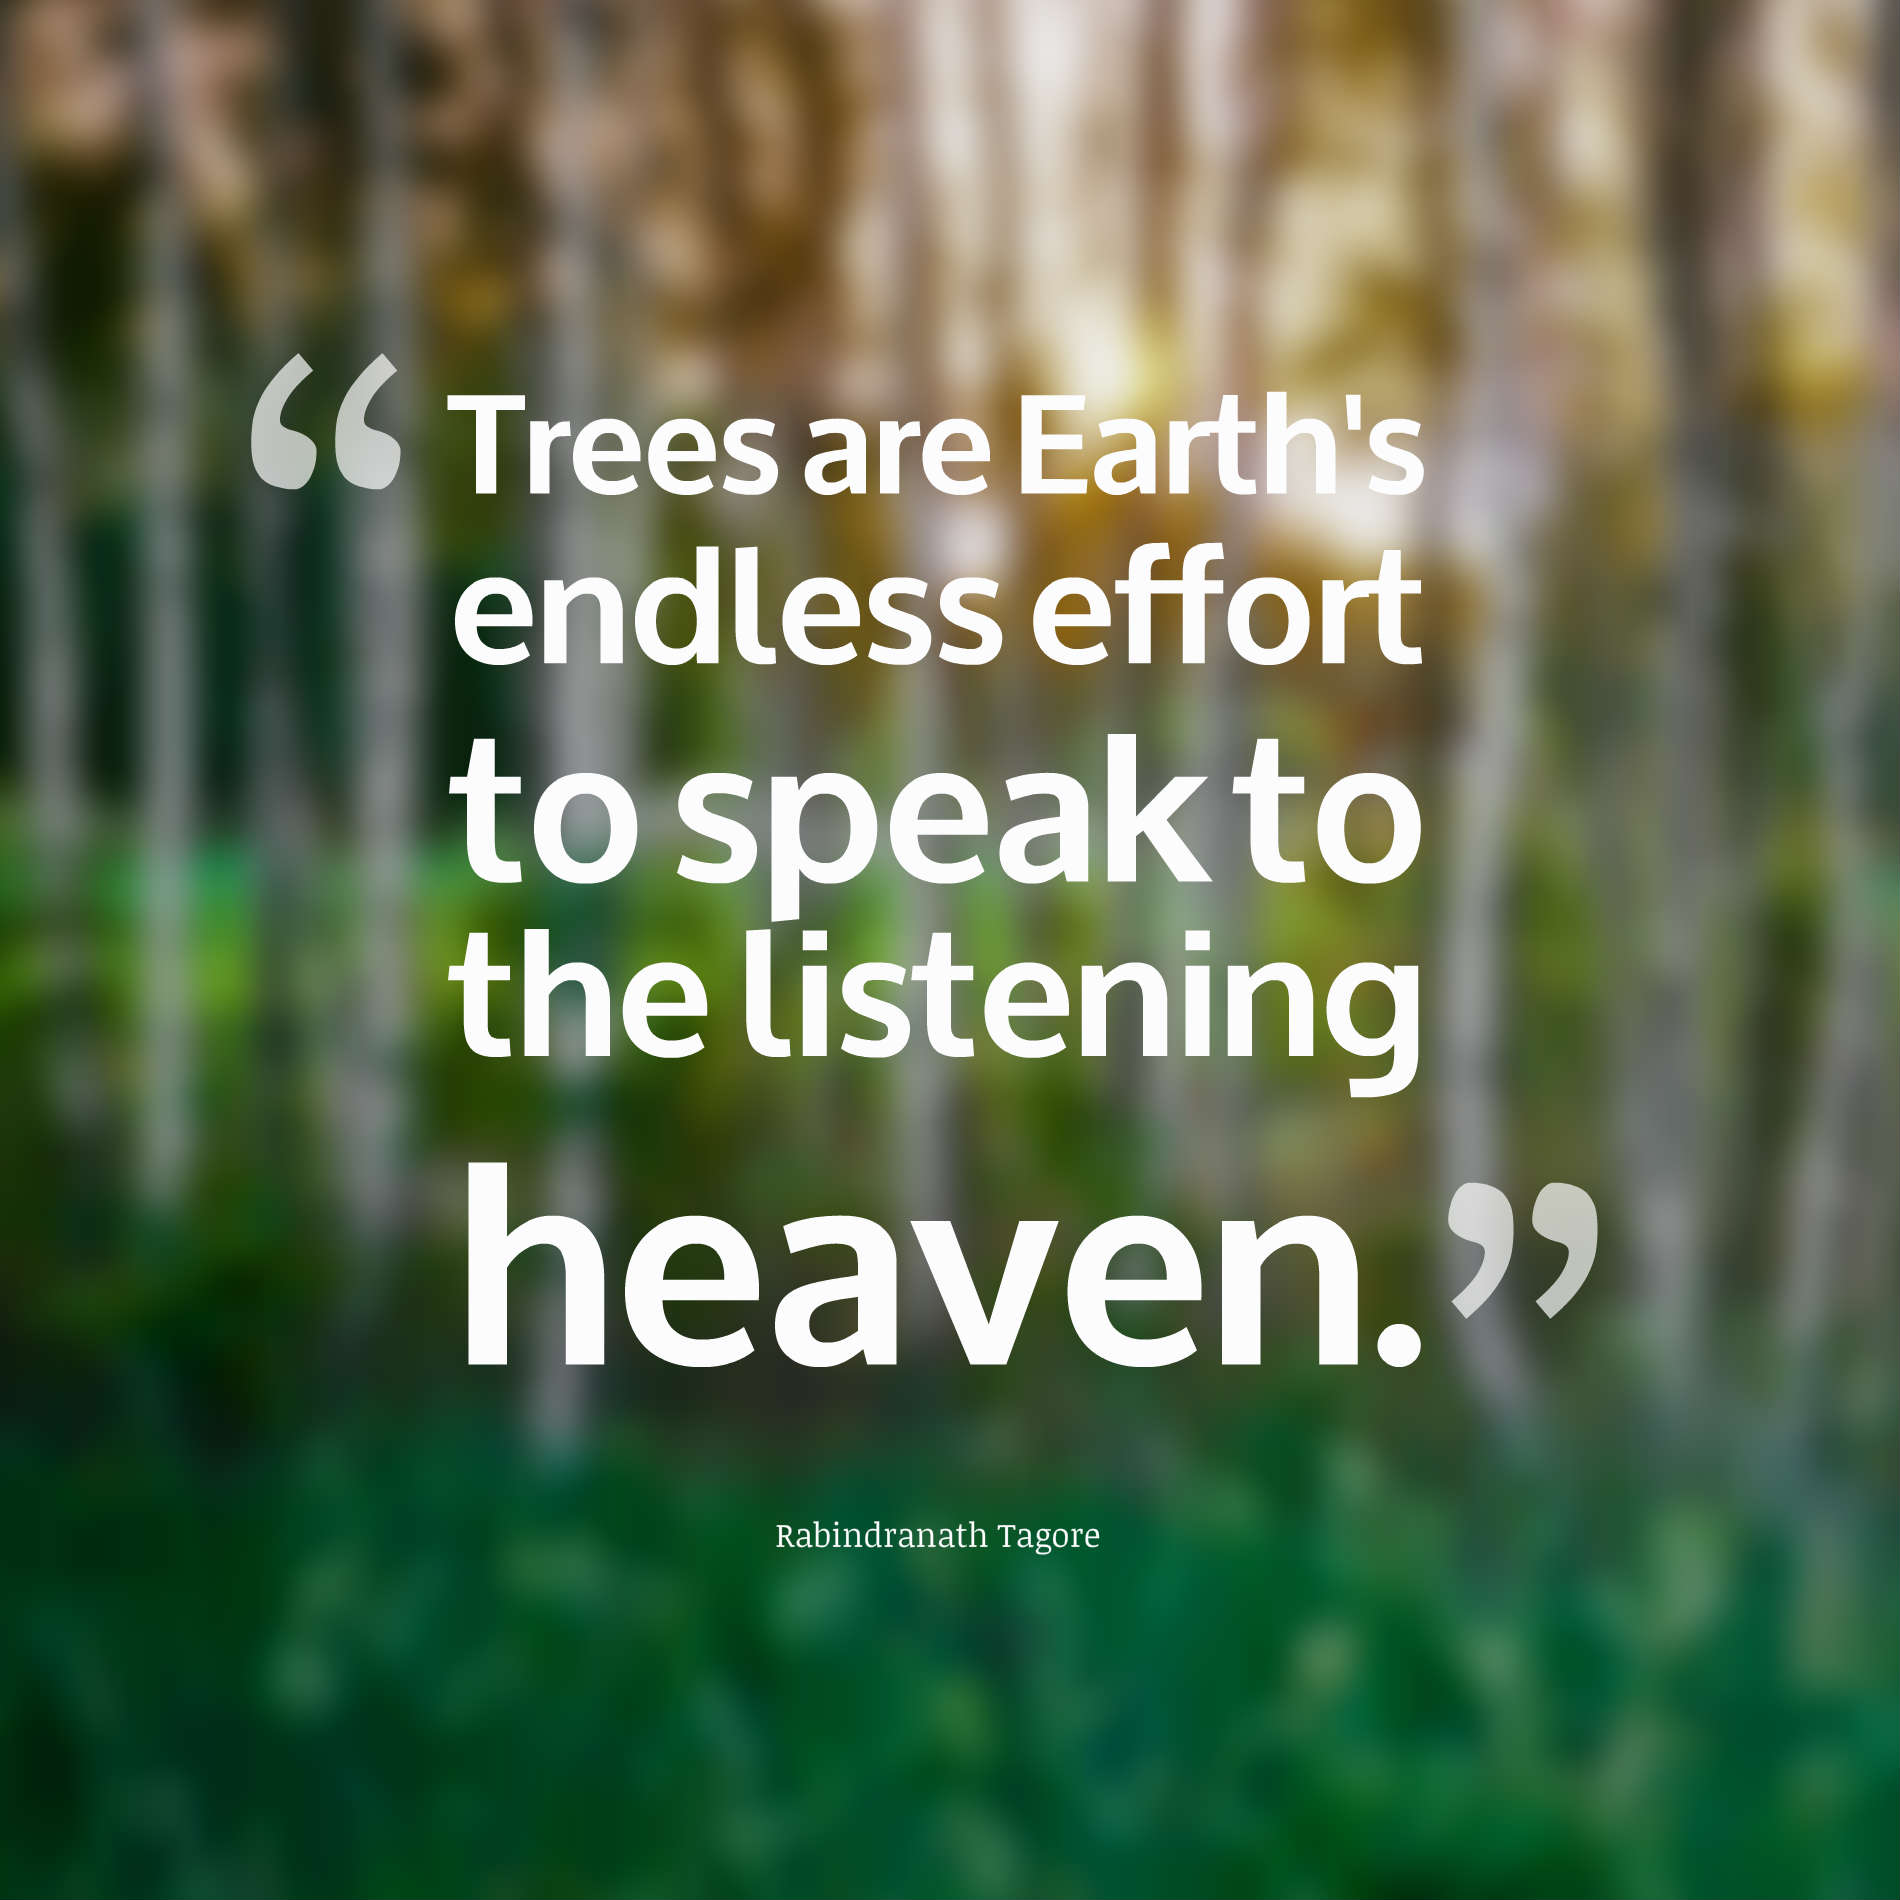 Trees are Earth's endless effort to speak to the listening heaven.